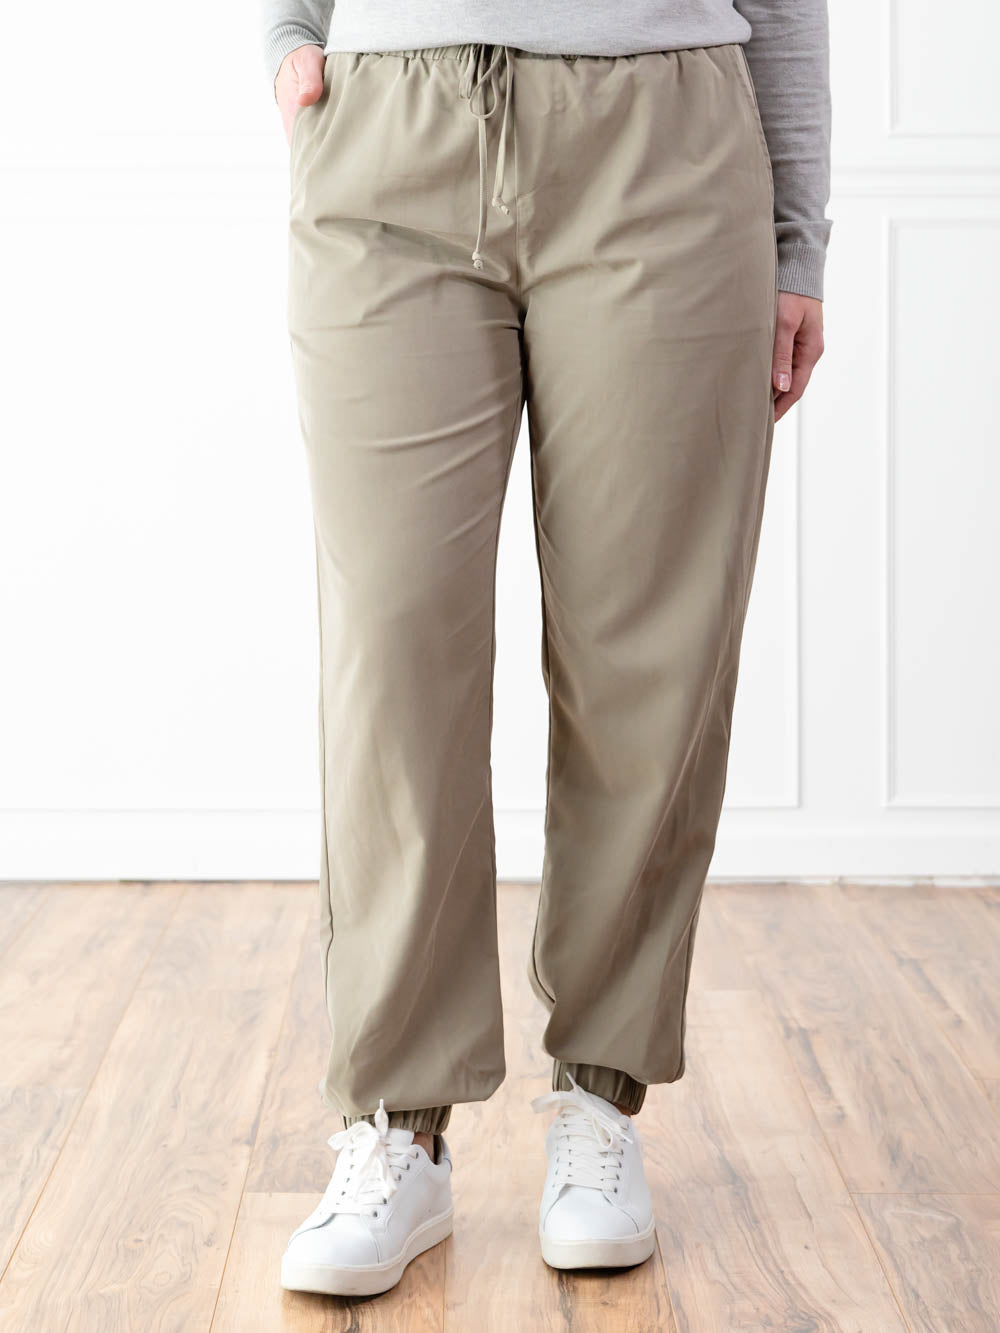 Joggers for Tall Ladies